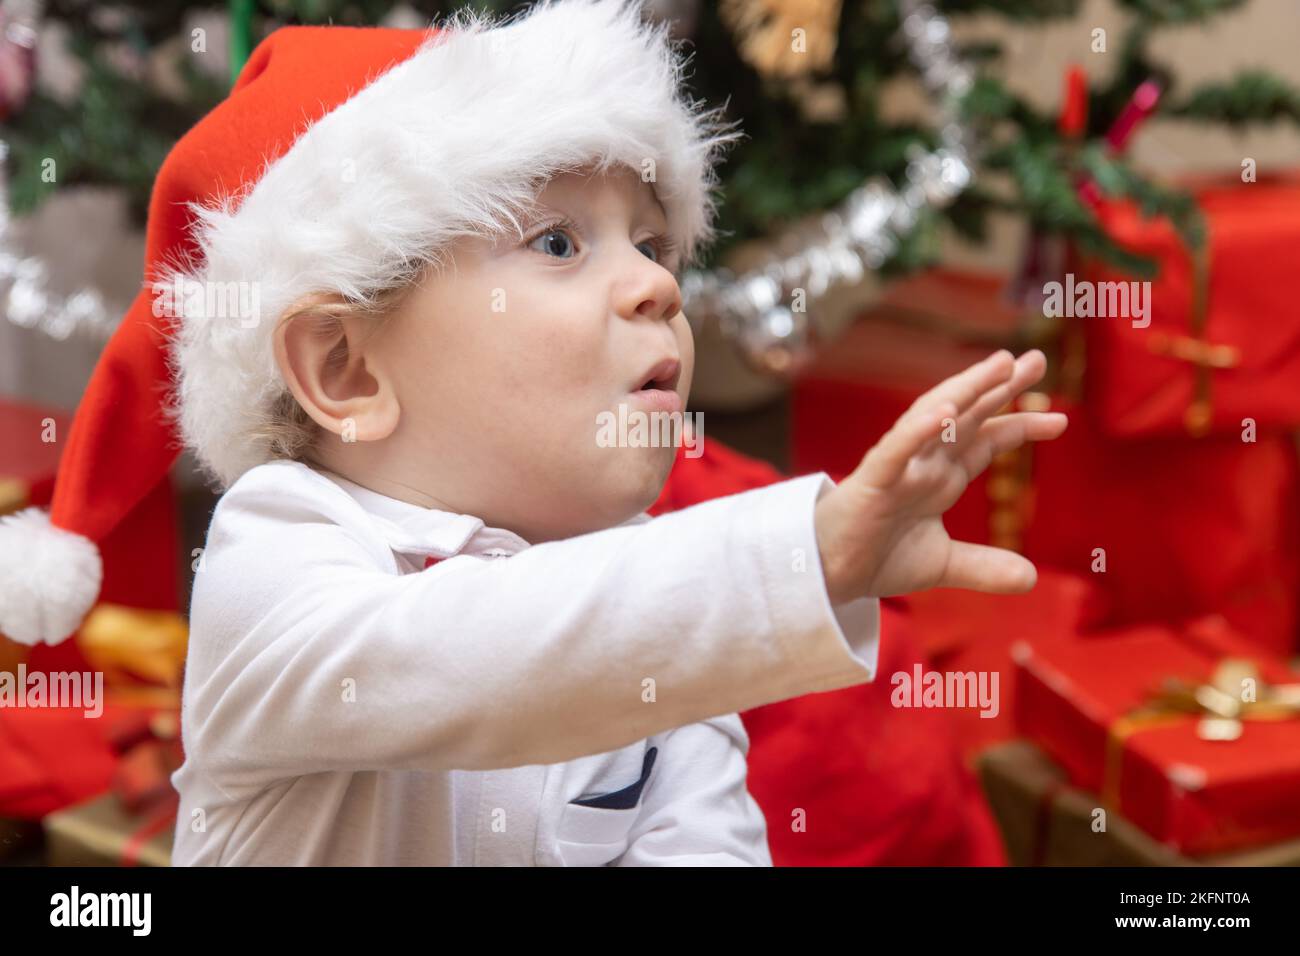 Little boy with a Santa Claus hat beside the Christmas tree with gifts Stock Photo